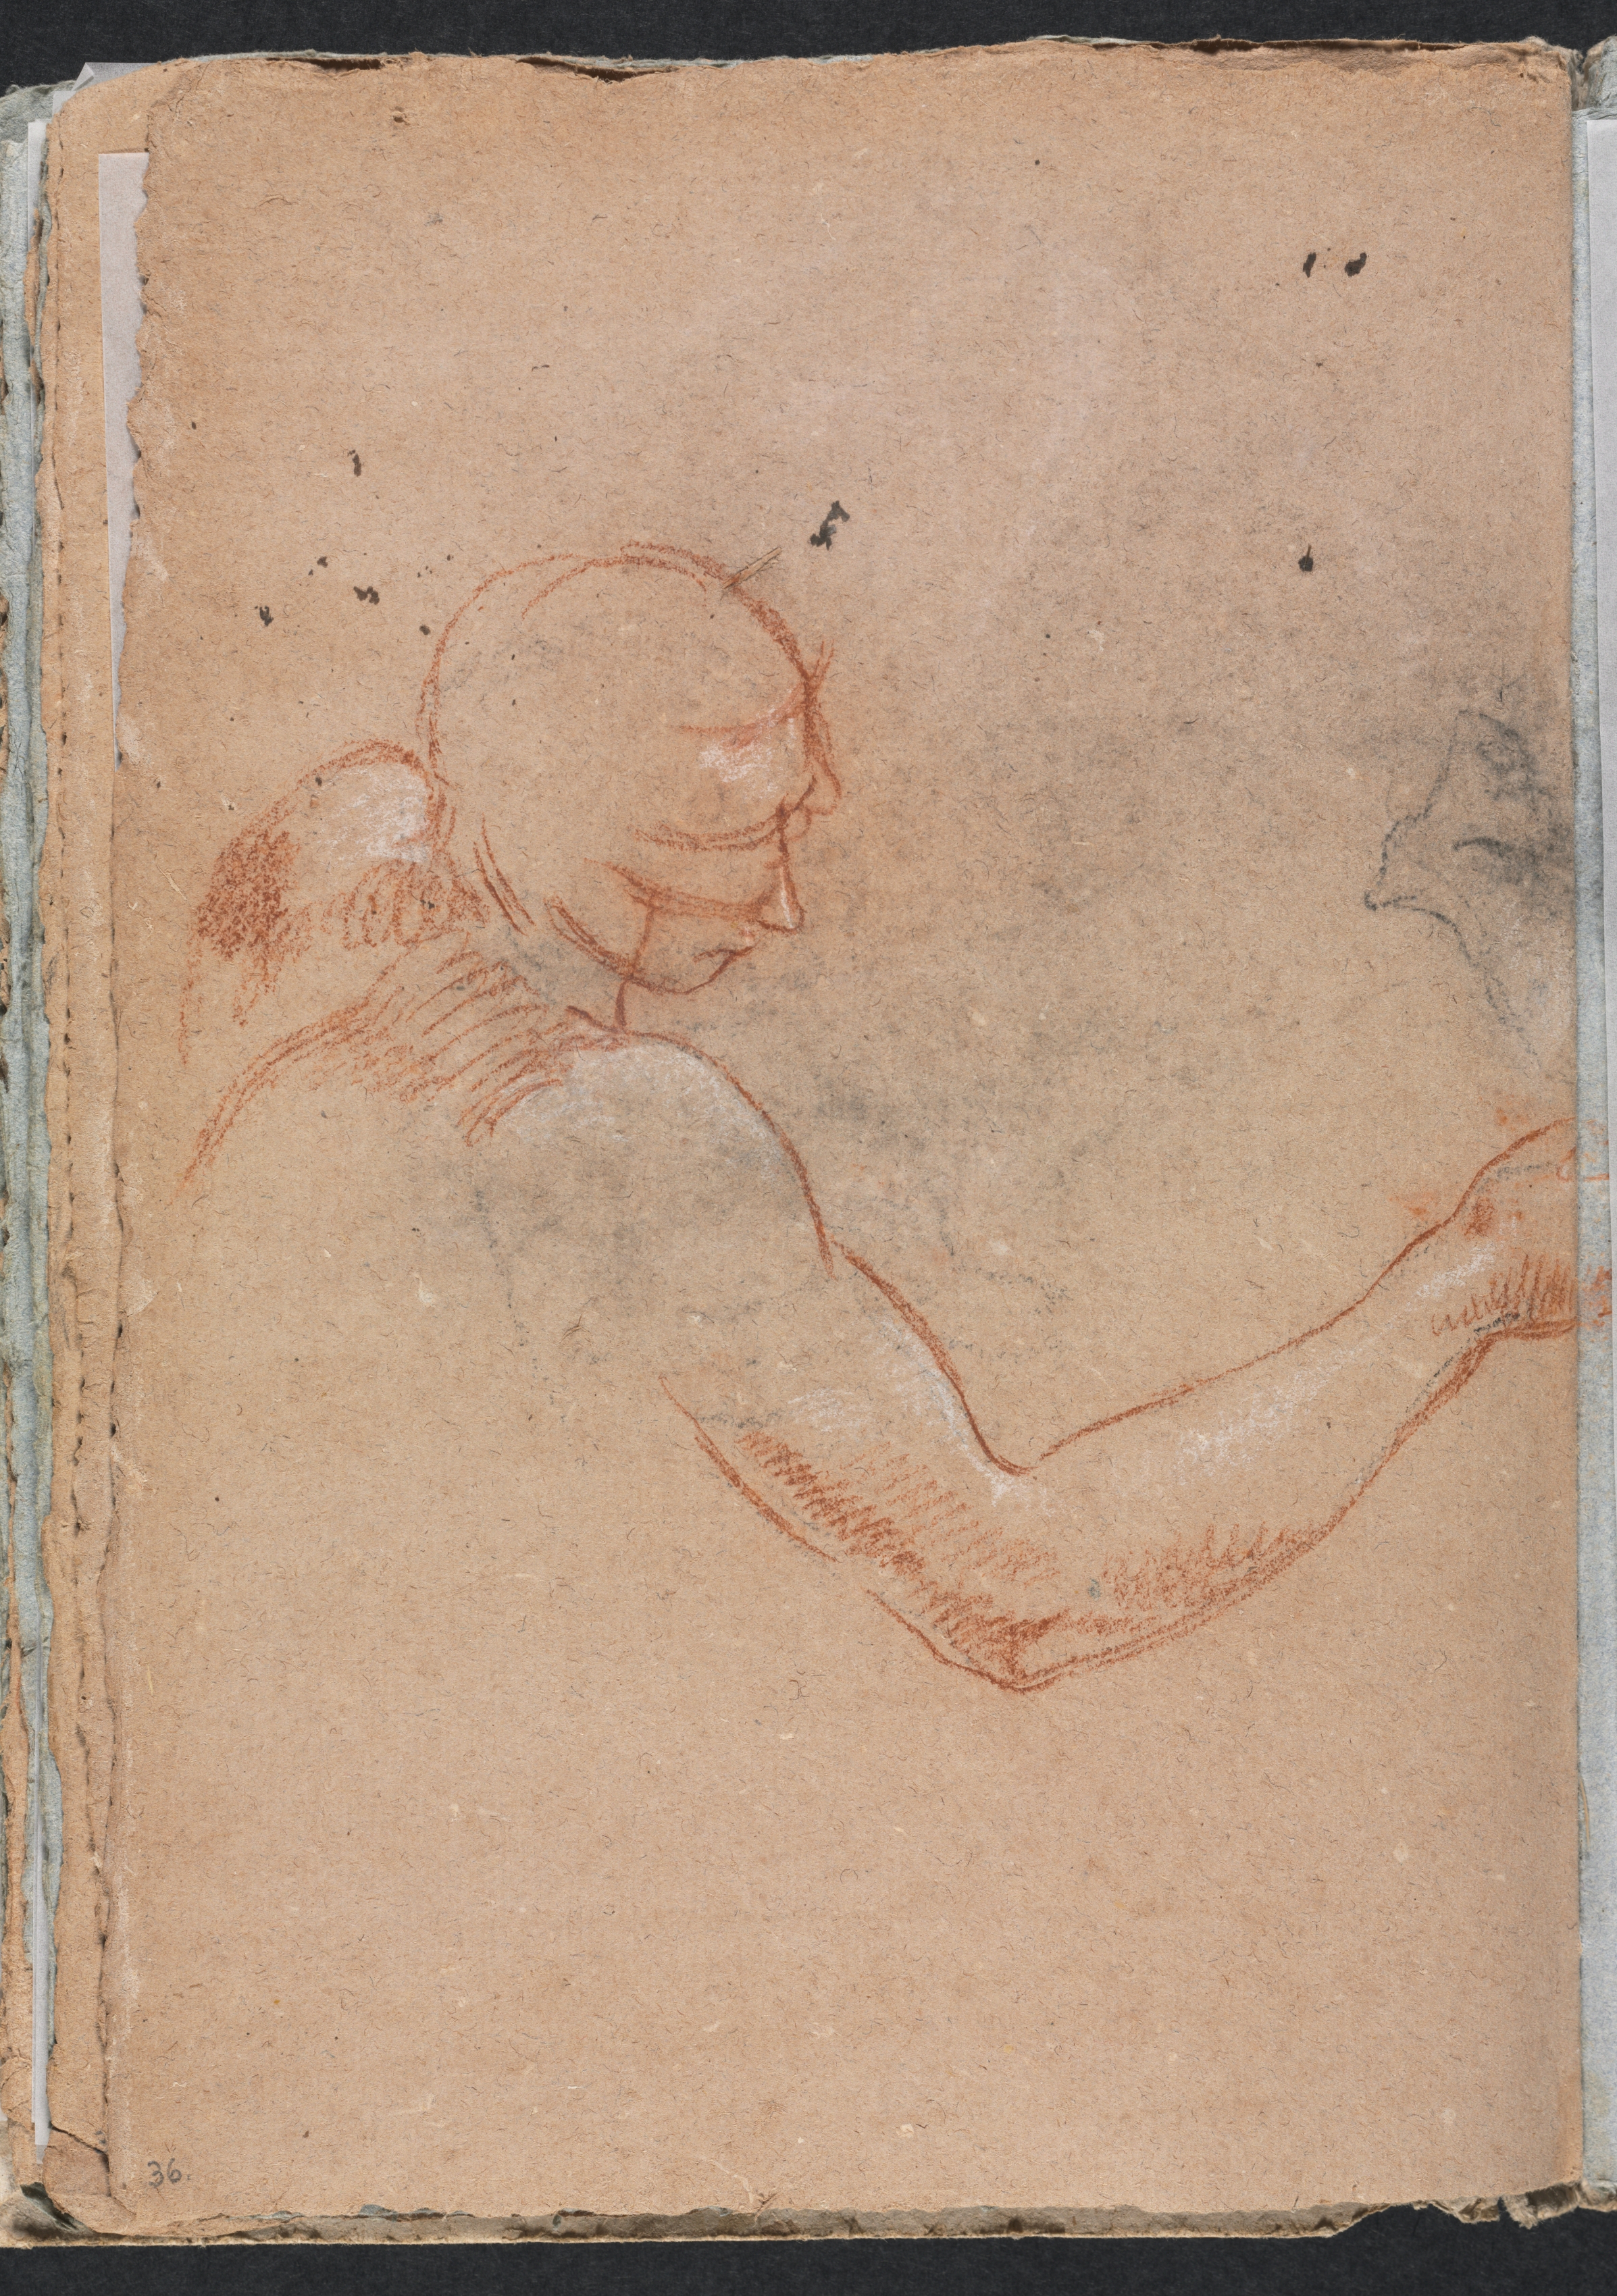 Verona Sketchbook: Nude with head and right arm (page 36)